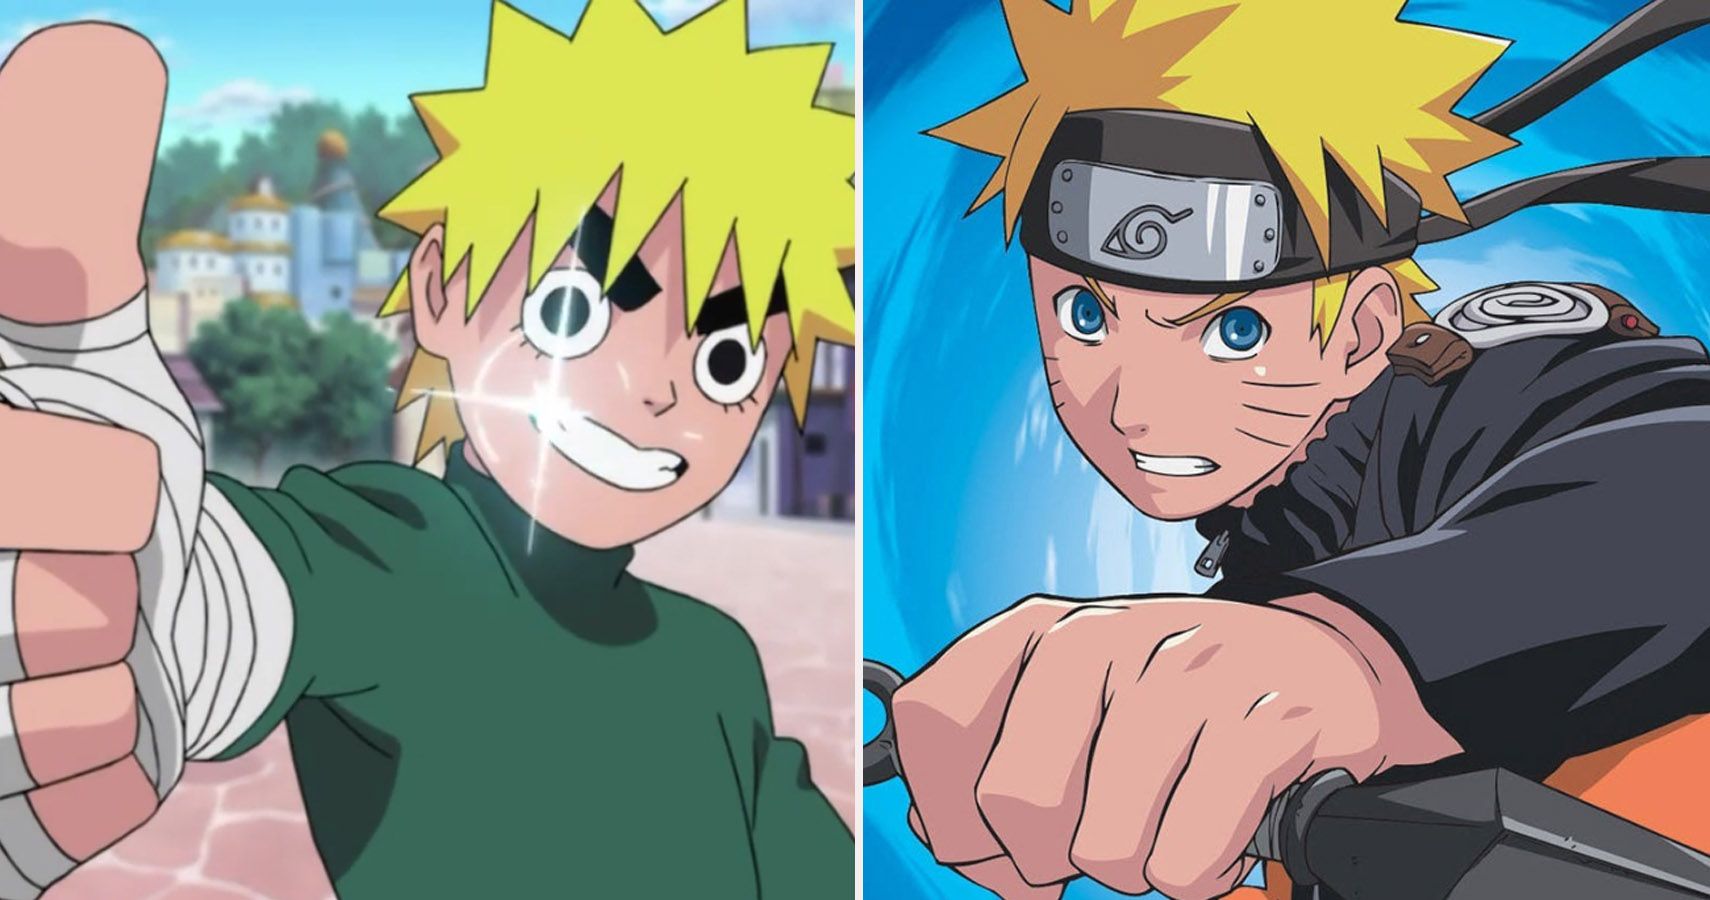 Naruto characters based on which gay stereotype they'd fit into